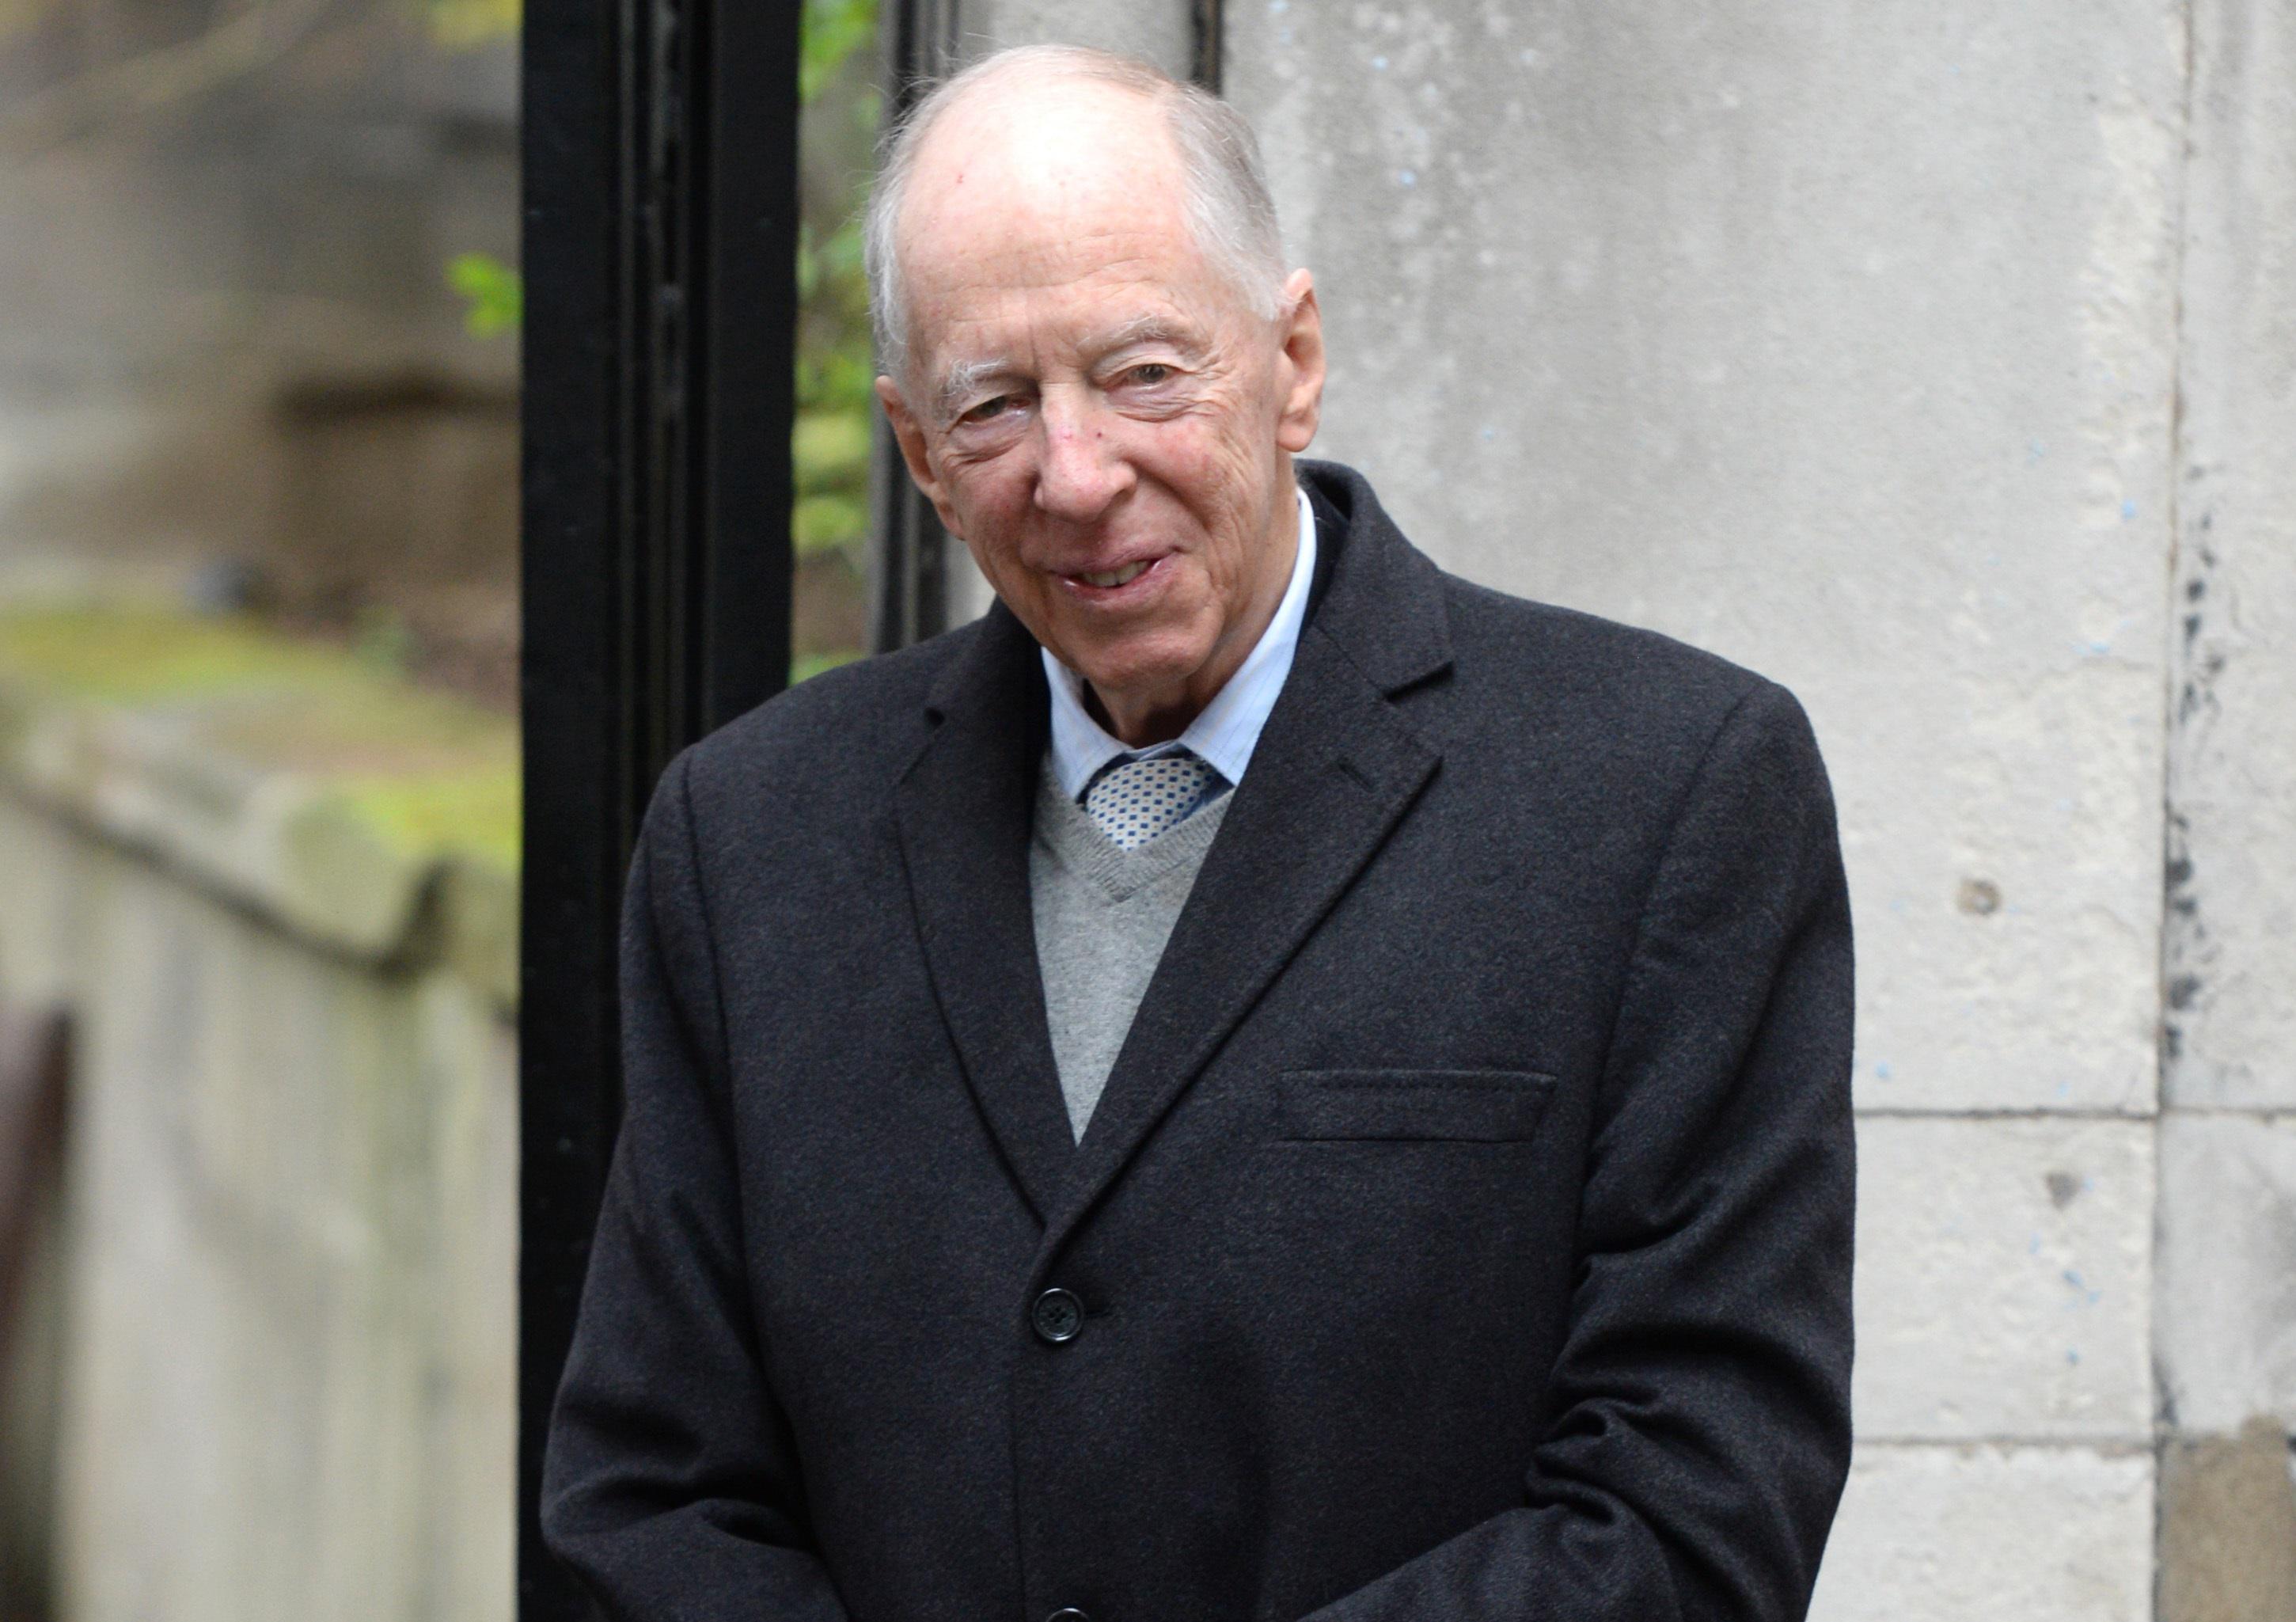 87-year-old Jacob Rothschild dies in London